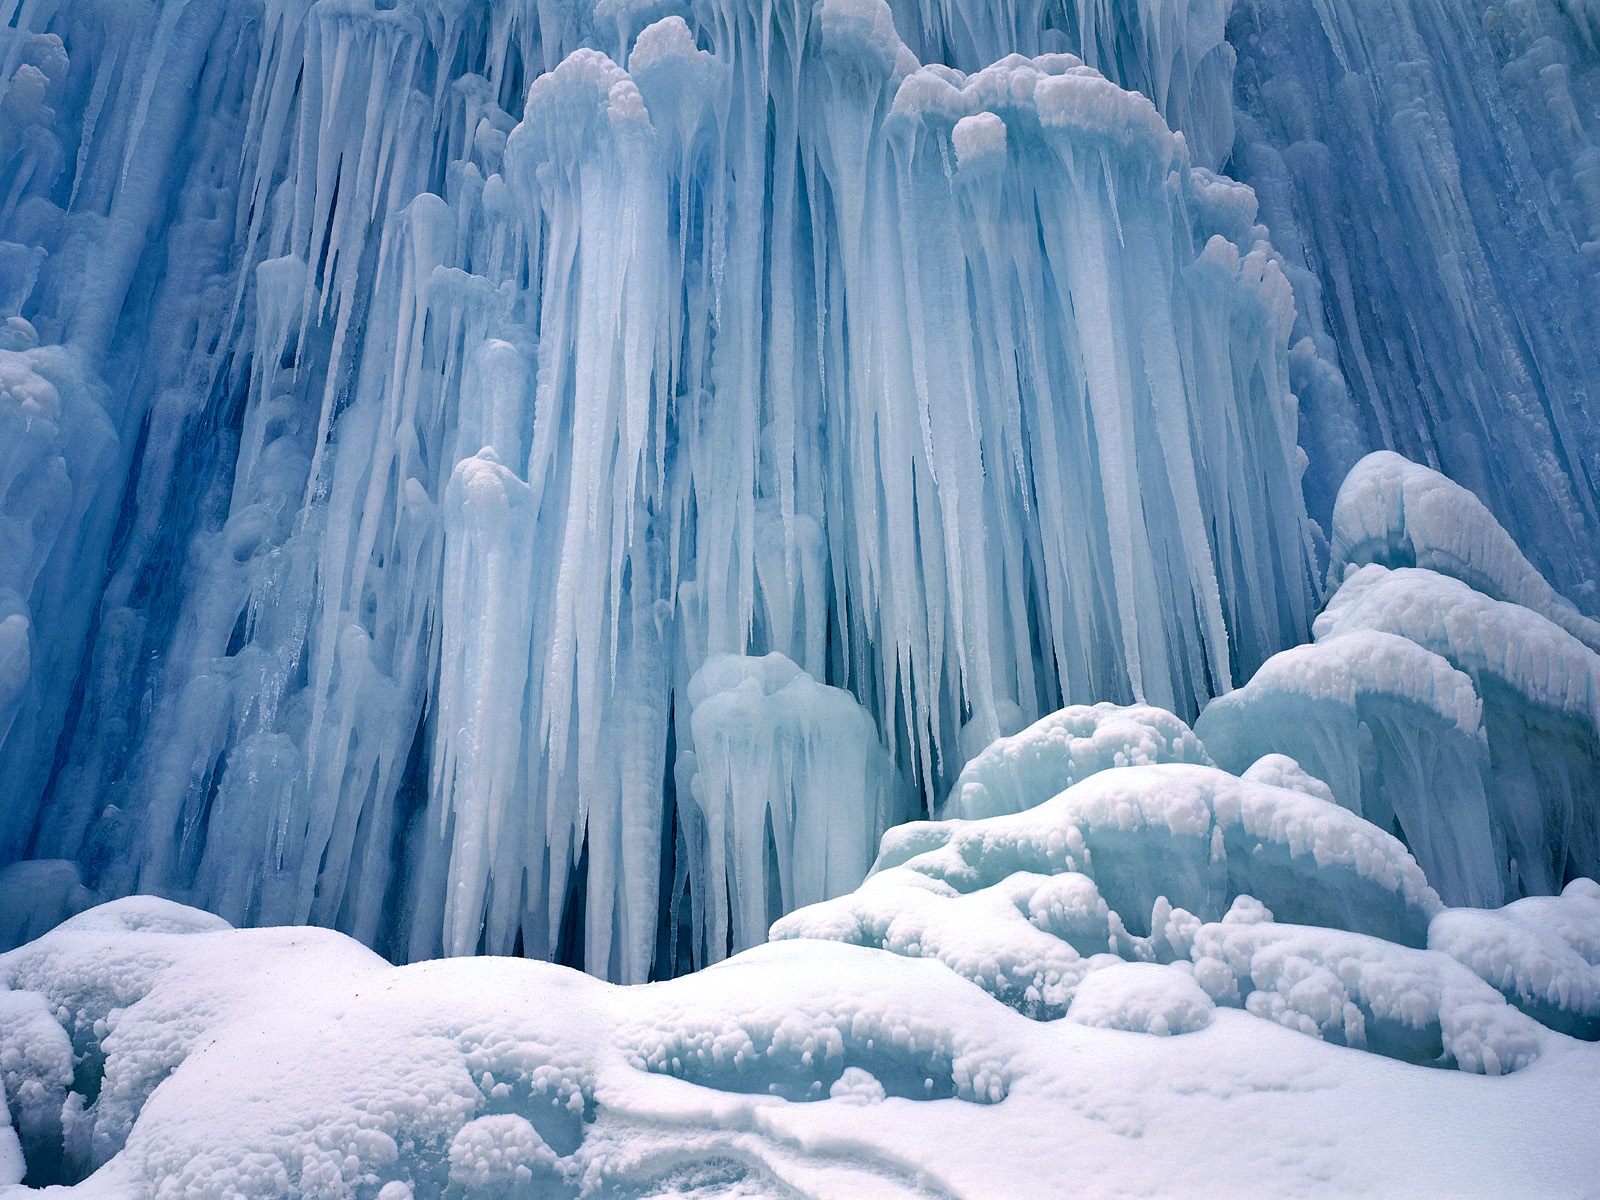 Winter Pictures winter ice wallpaper Wallpapereorg 1600x1200